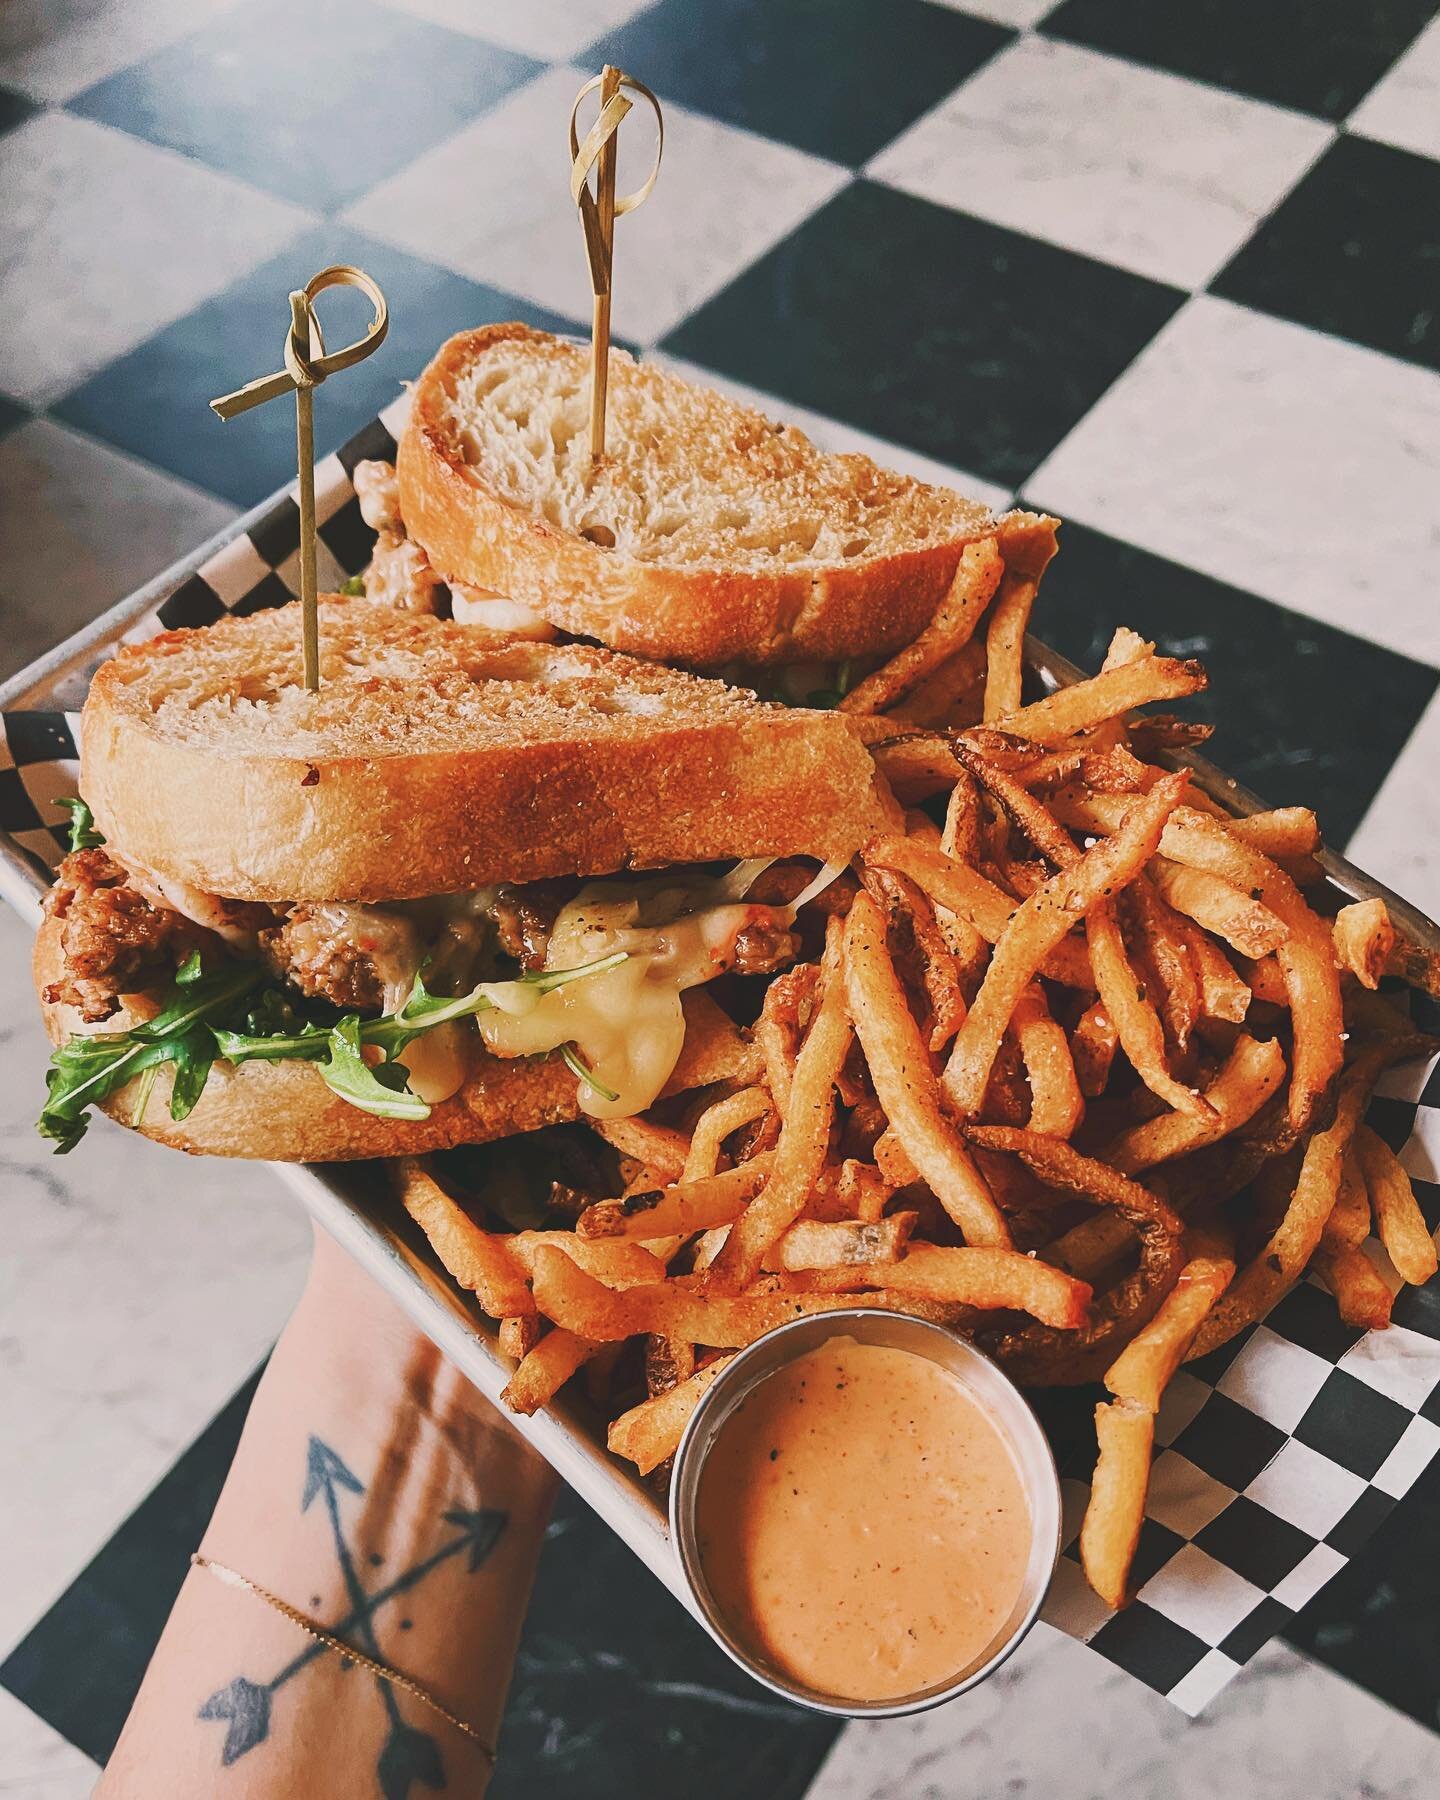 𝓑𝓲𝓴𝓲𝓷𝓲 𝓢𝓪𝓷𝓭𝔀𝓲𝓬𝓱, ever heard of her? 
blackened shrimp, homemade andouille sausage, arugula, honey, mah&oacute;n, on house made bread&hellip; HOUSE MADE BREAD! A southern twist on a Barcelona classic, why not?

This sandwich is so dang g